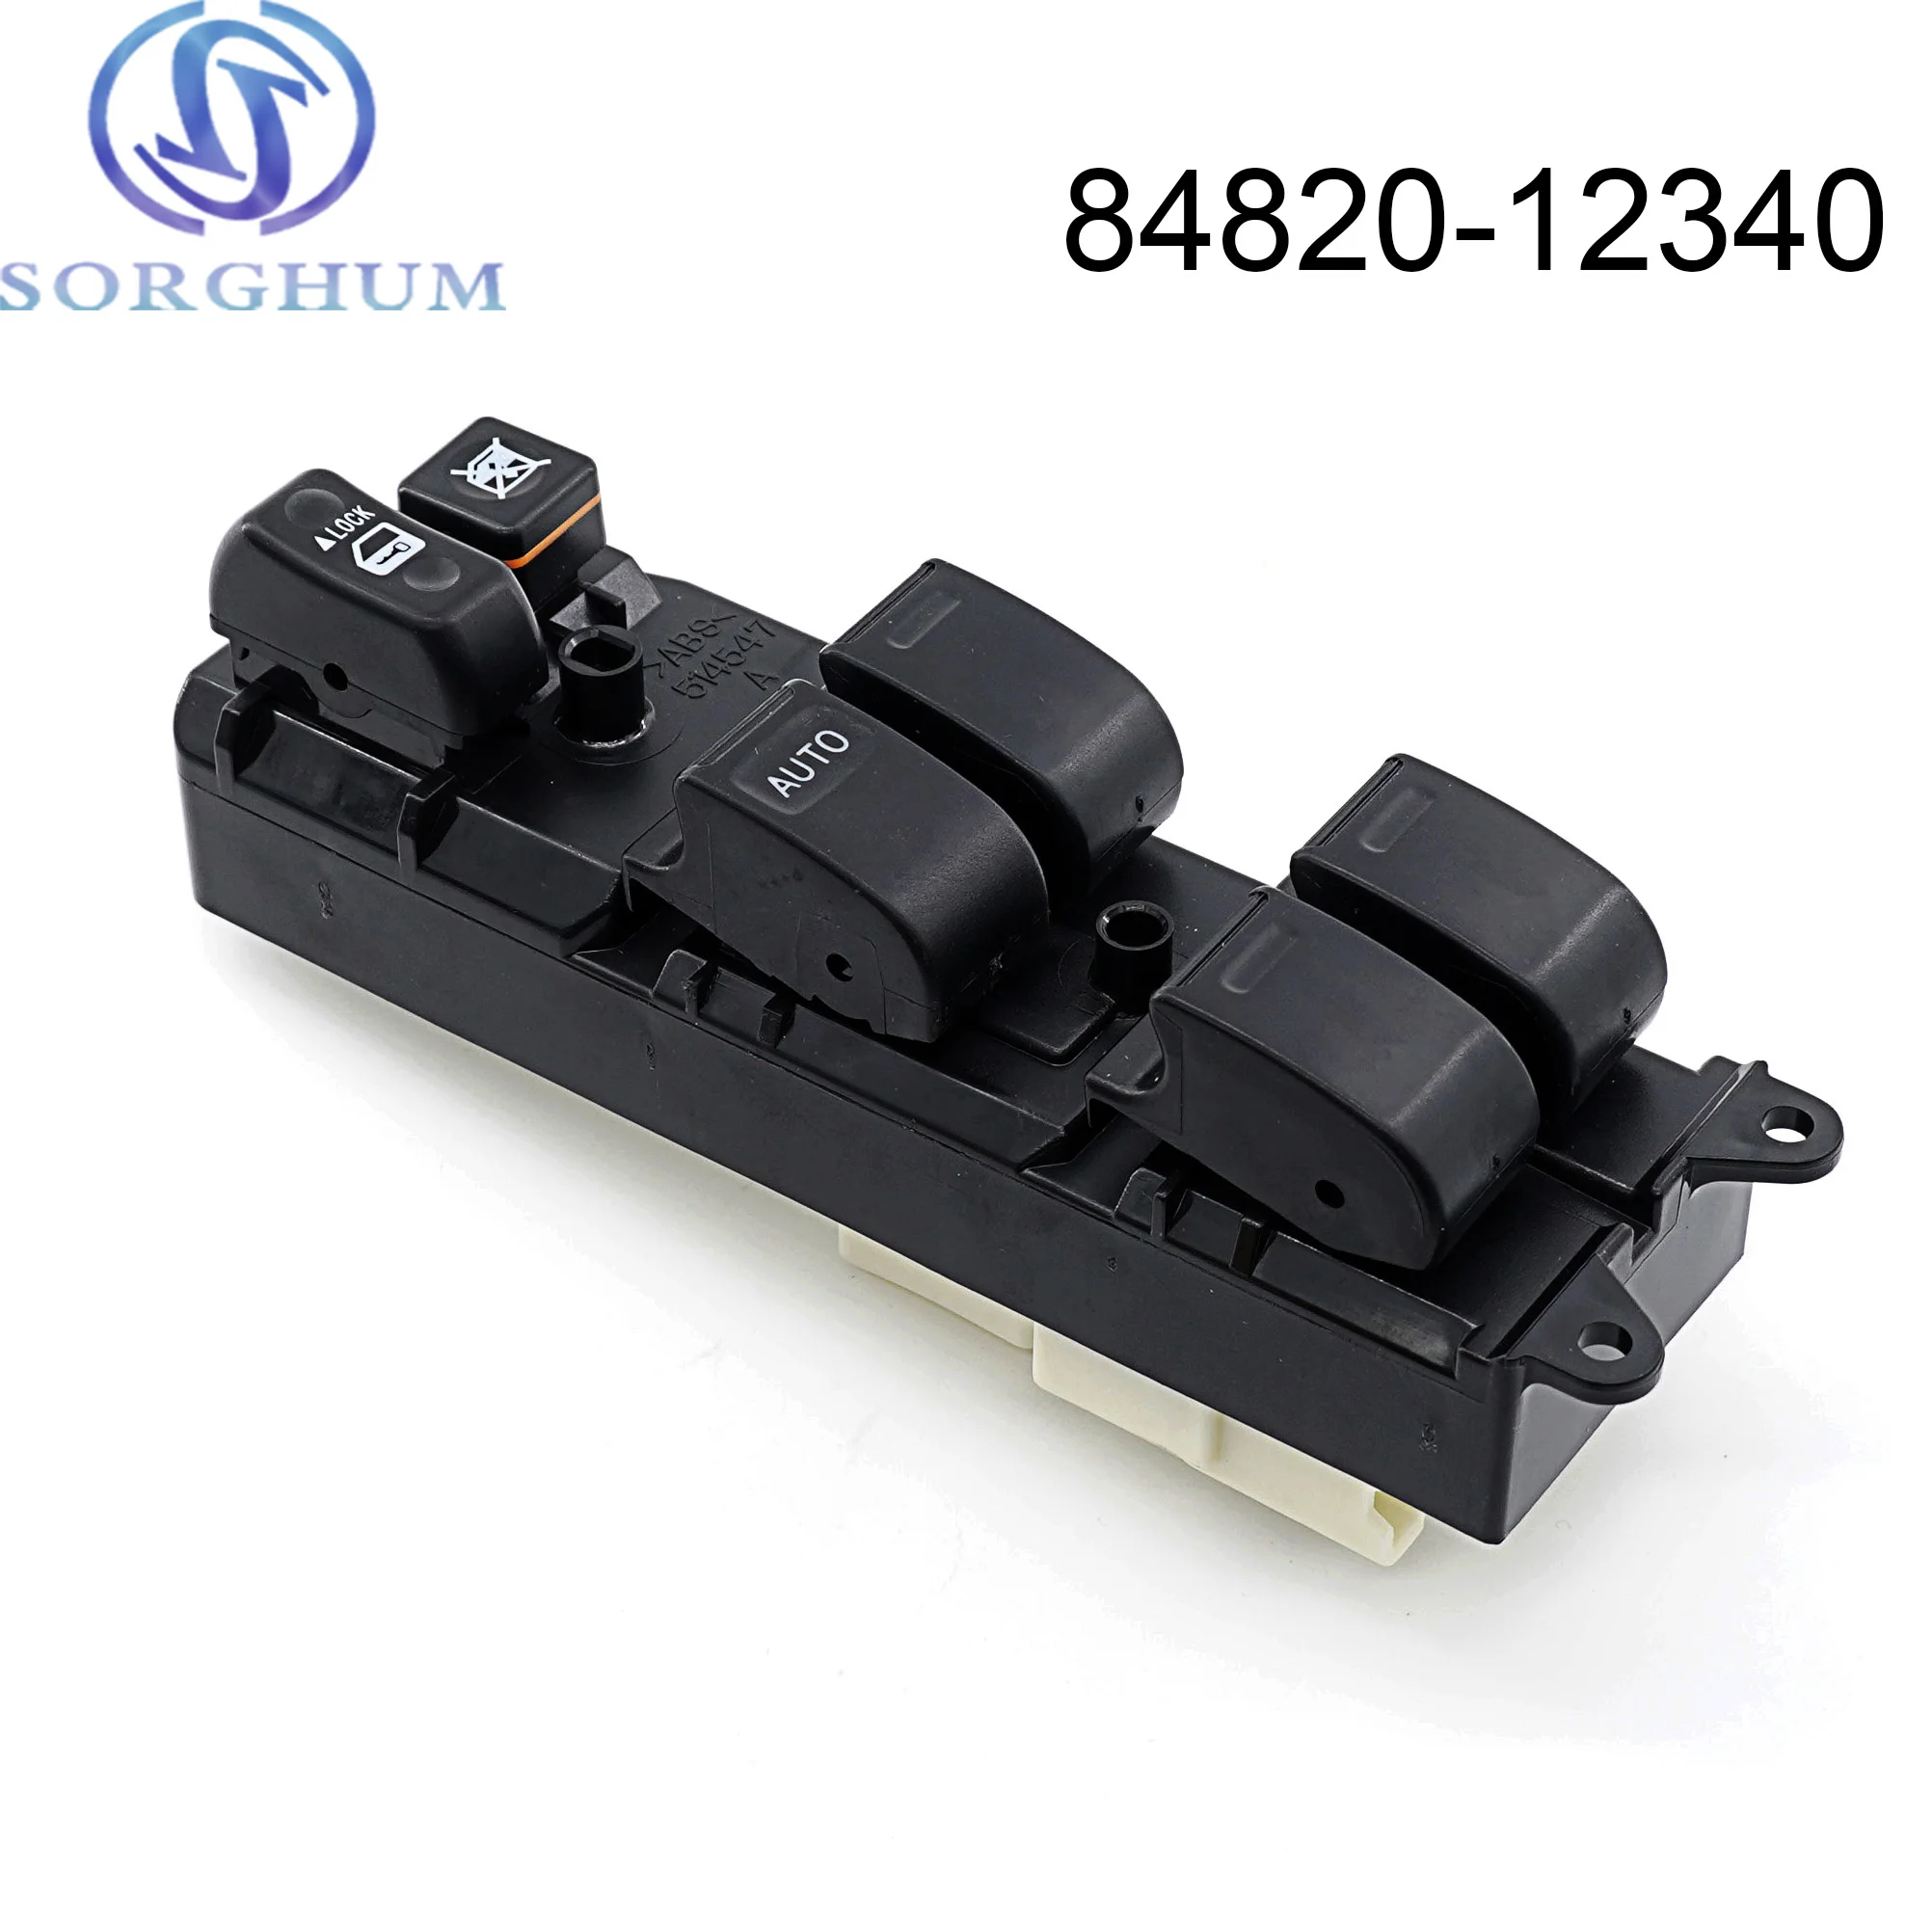 

84820-12340 Power Window Master Control Switch For Toyota Corolla 1997-2004 7AFE 4AFE 3ZZFE 84820-42060 84820-60110 8482012340